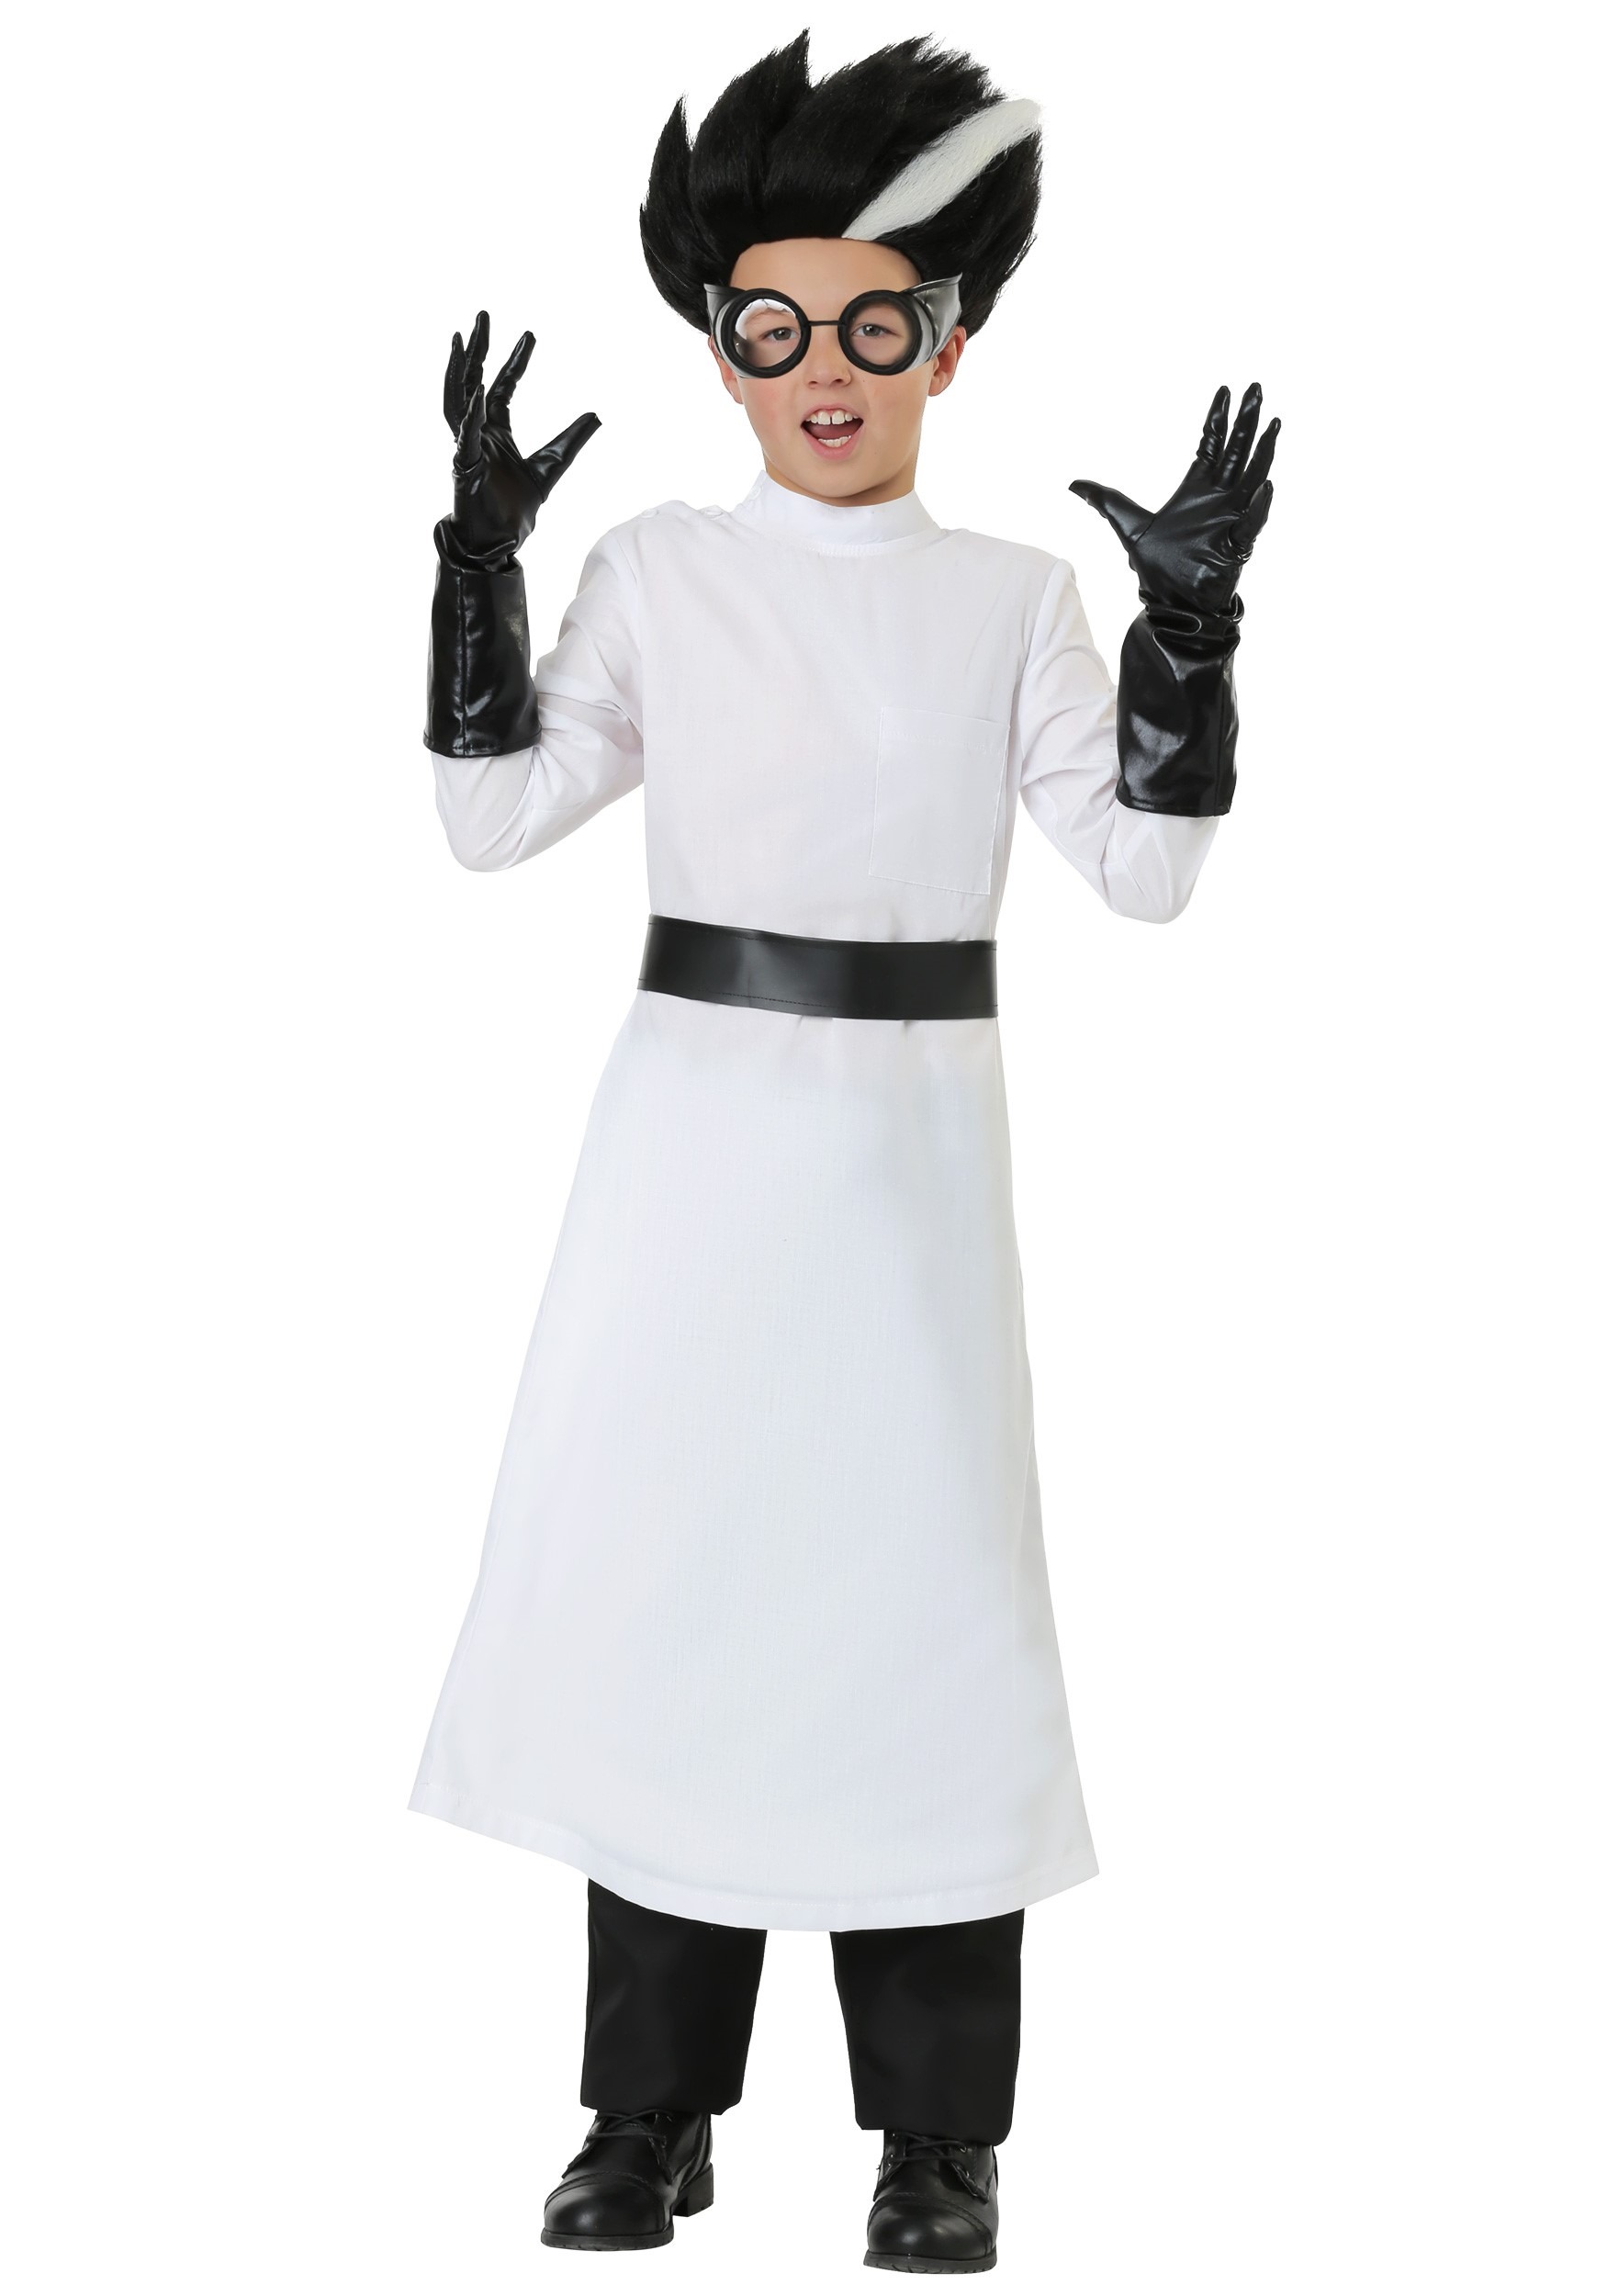 Mad Scientist Costume for Kids